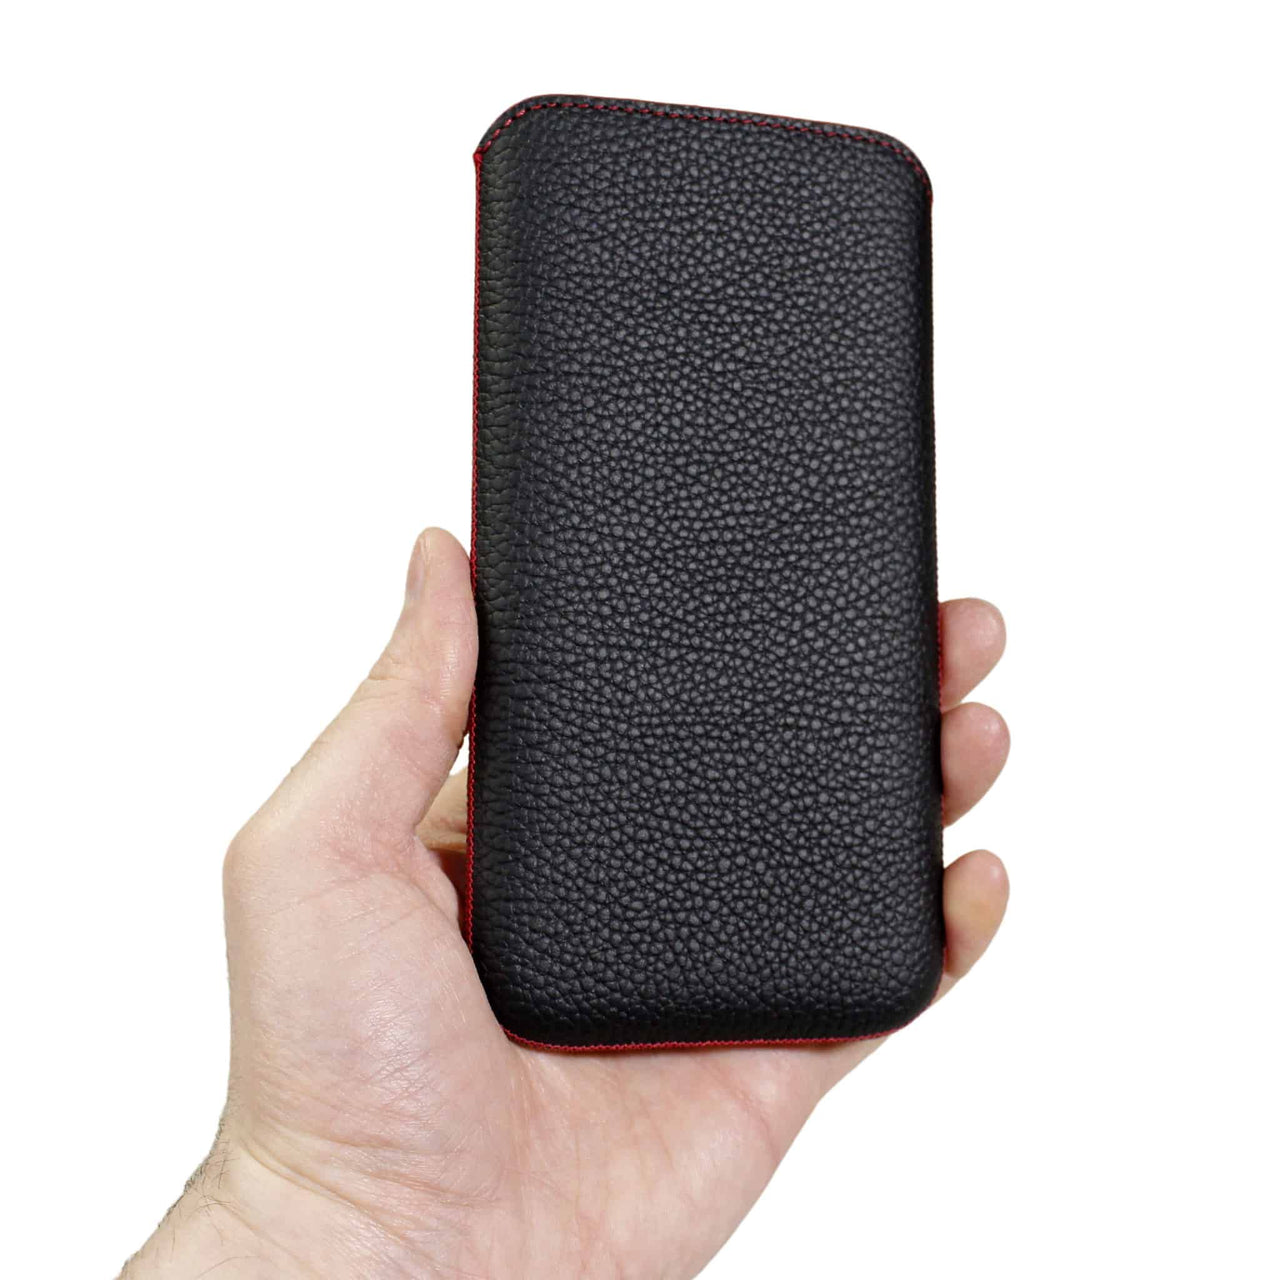 iPhone 14 & 14 Pro Leather Pouch Sleeve Case | Artisanpouch